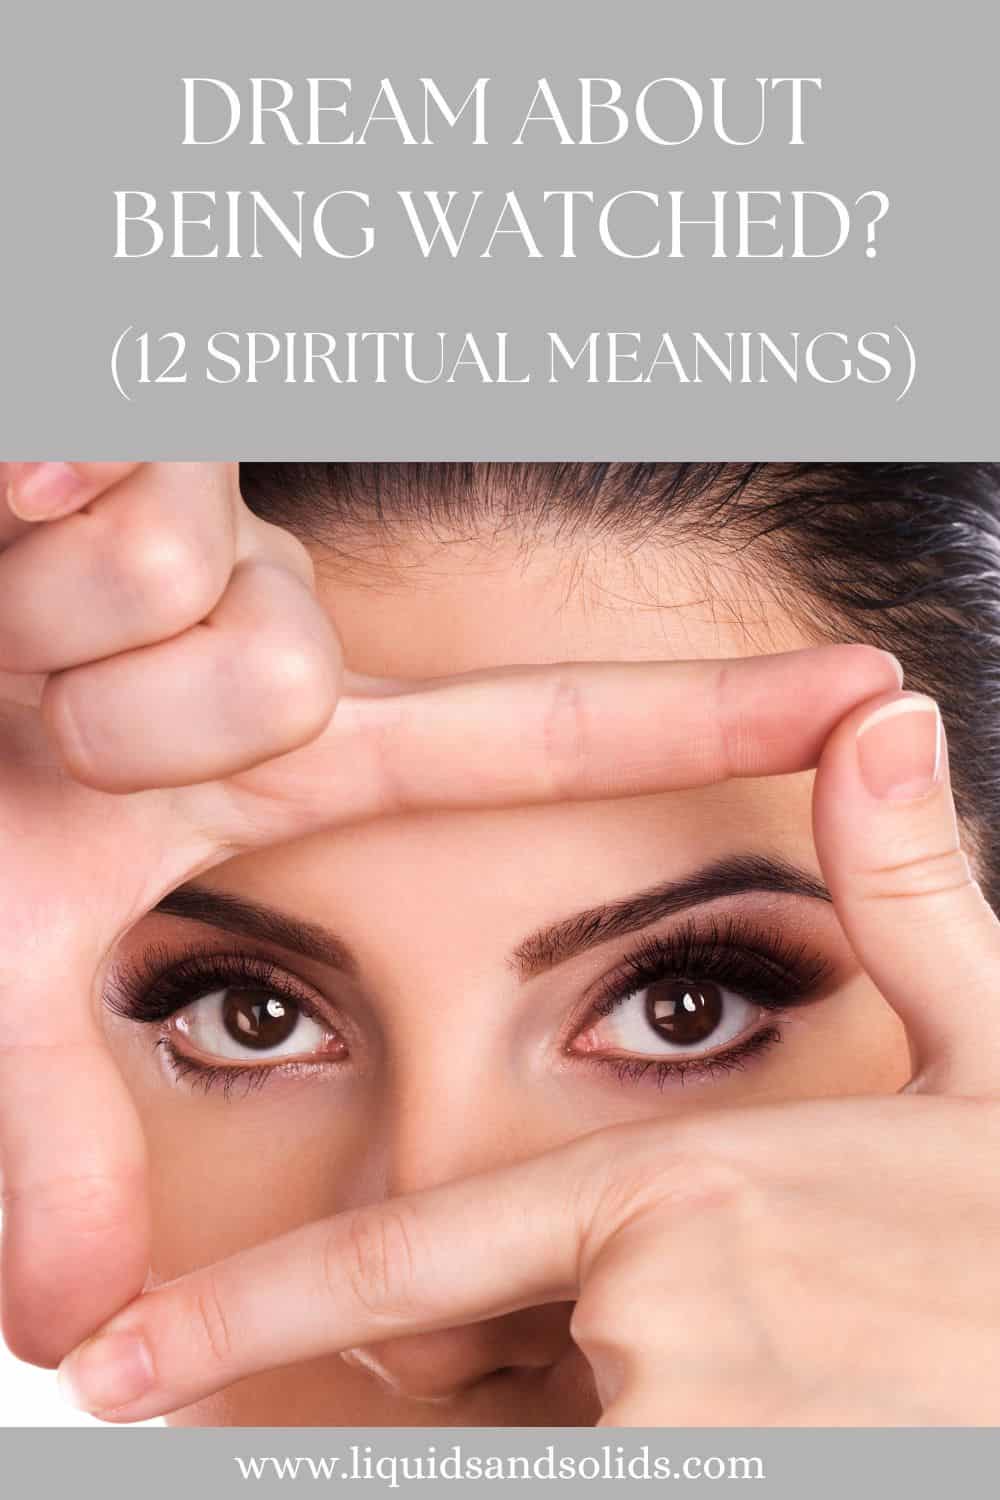 Dream About Being Watched? (12 Spiritual Meanings)